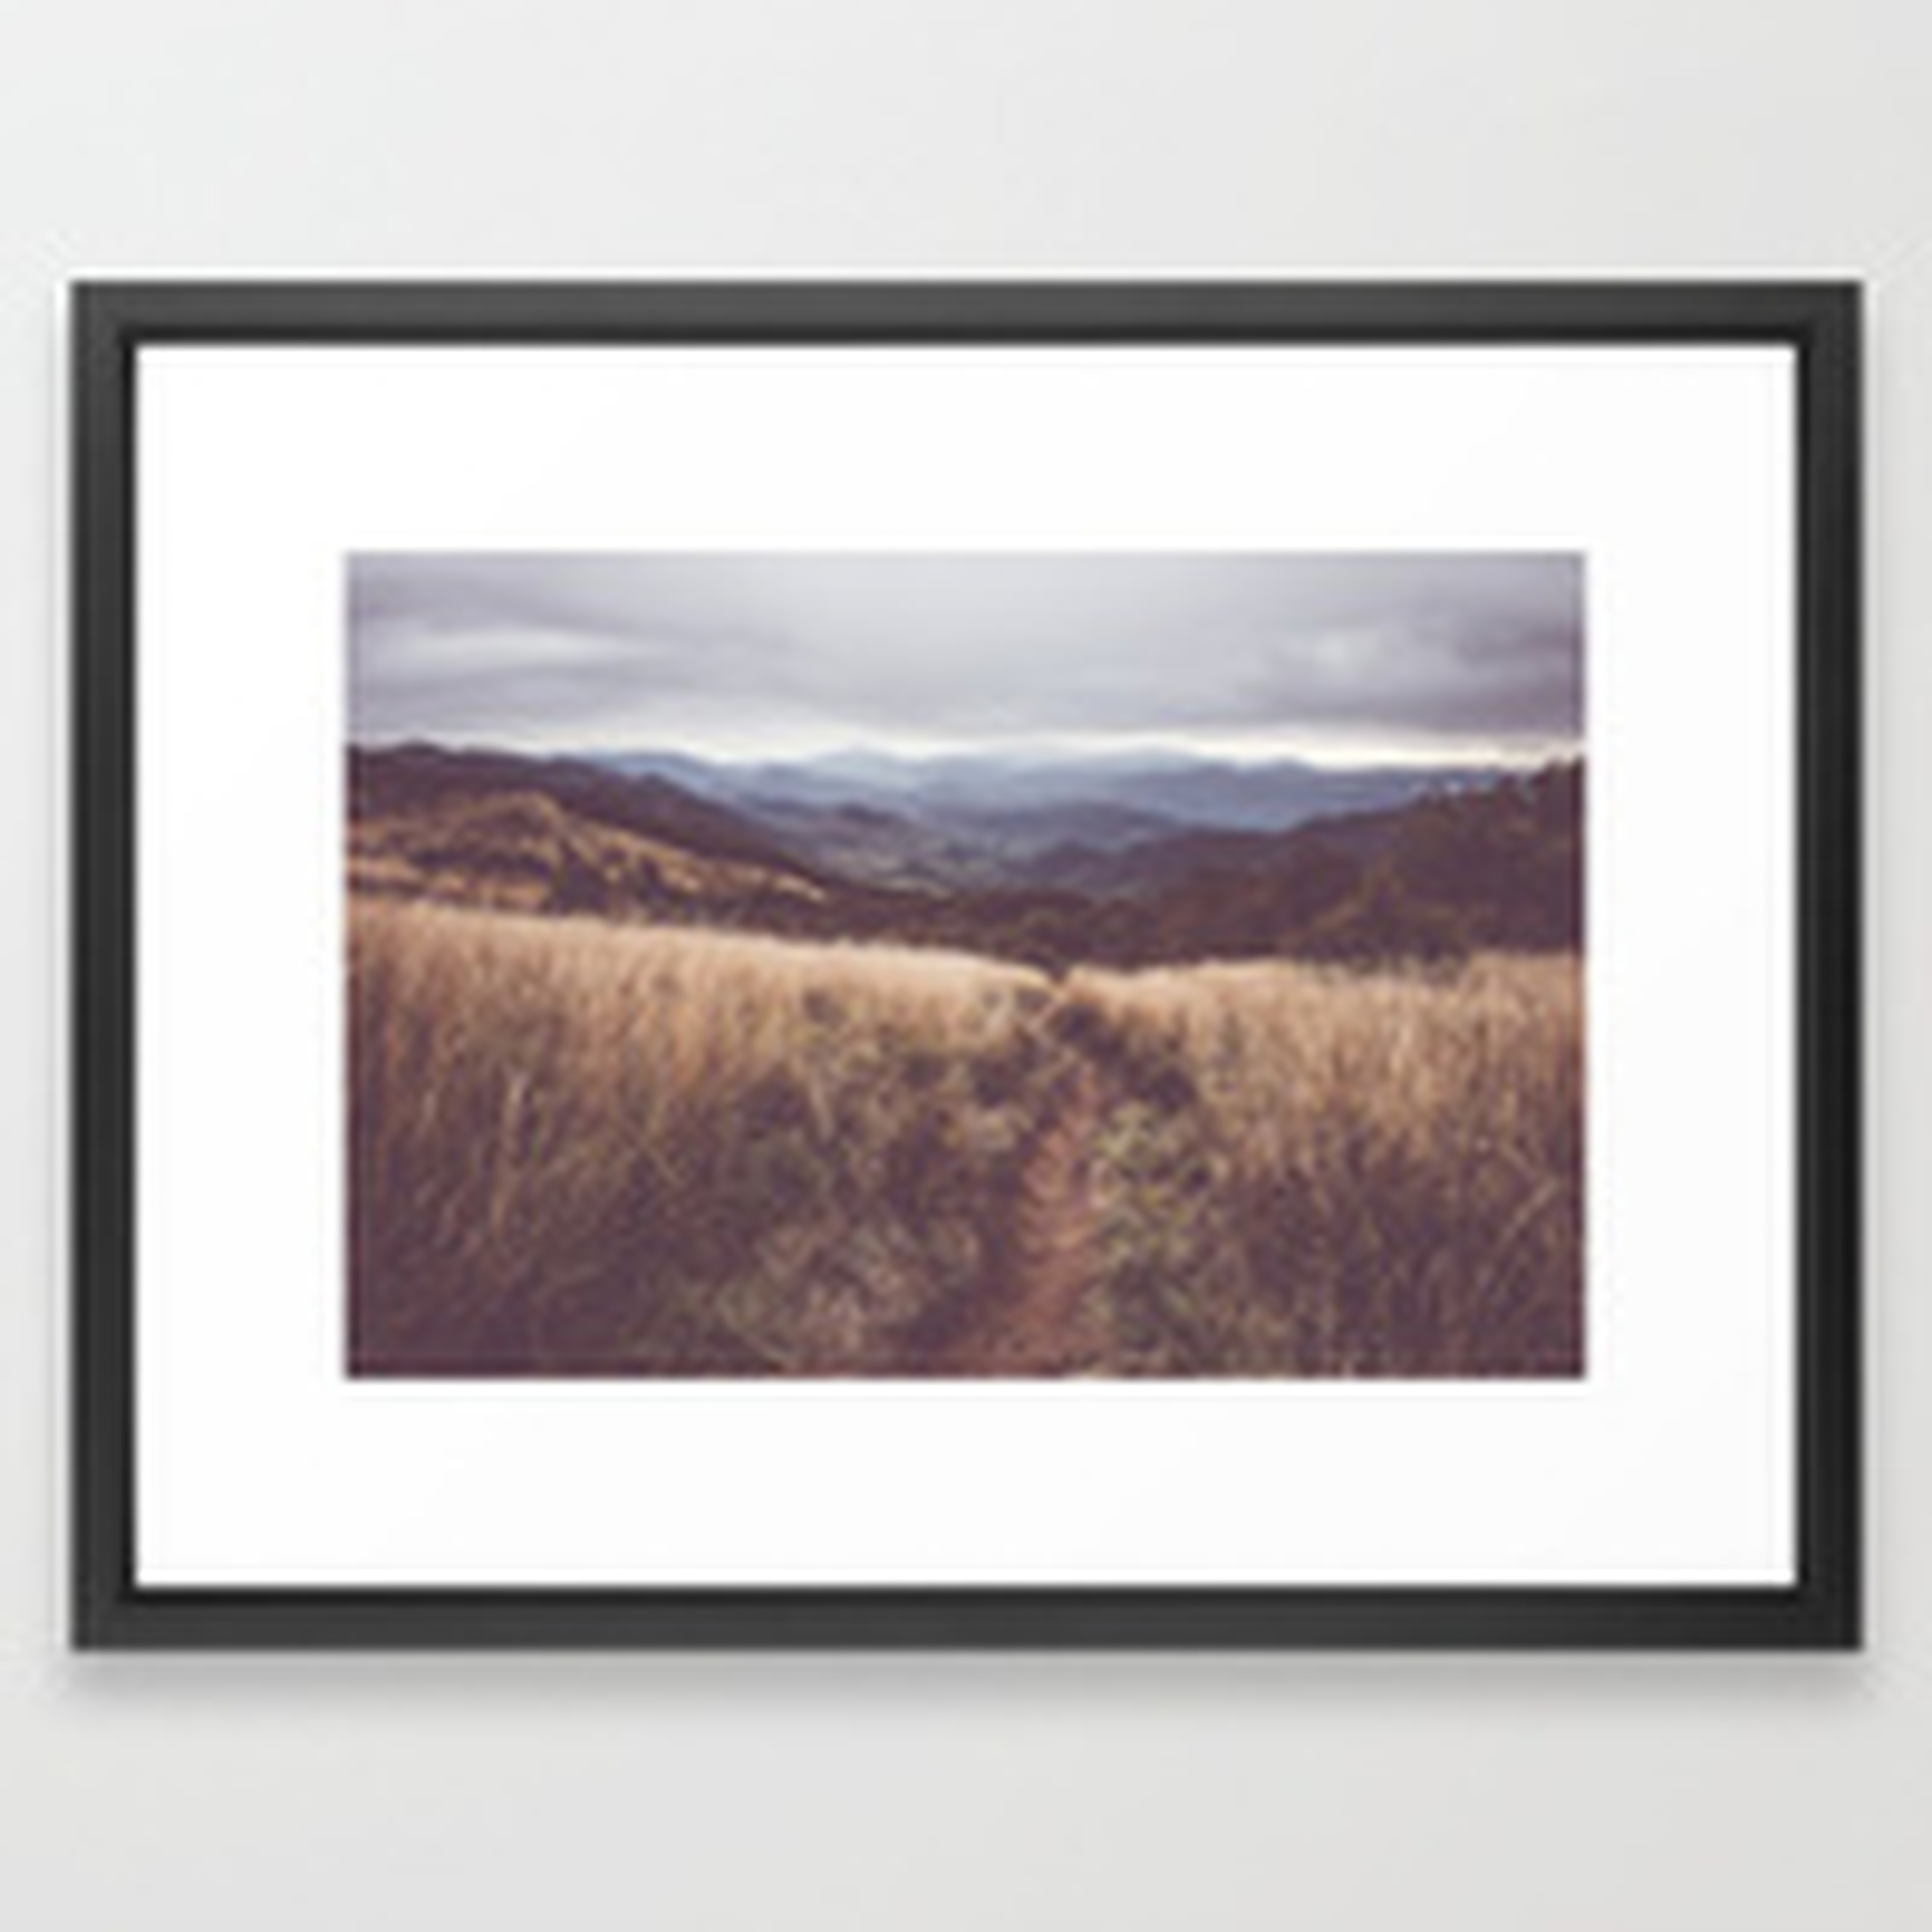 Bieszczady Mountains - Landscape and Nature Photography Framed Art Print, 18x24 - Society6